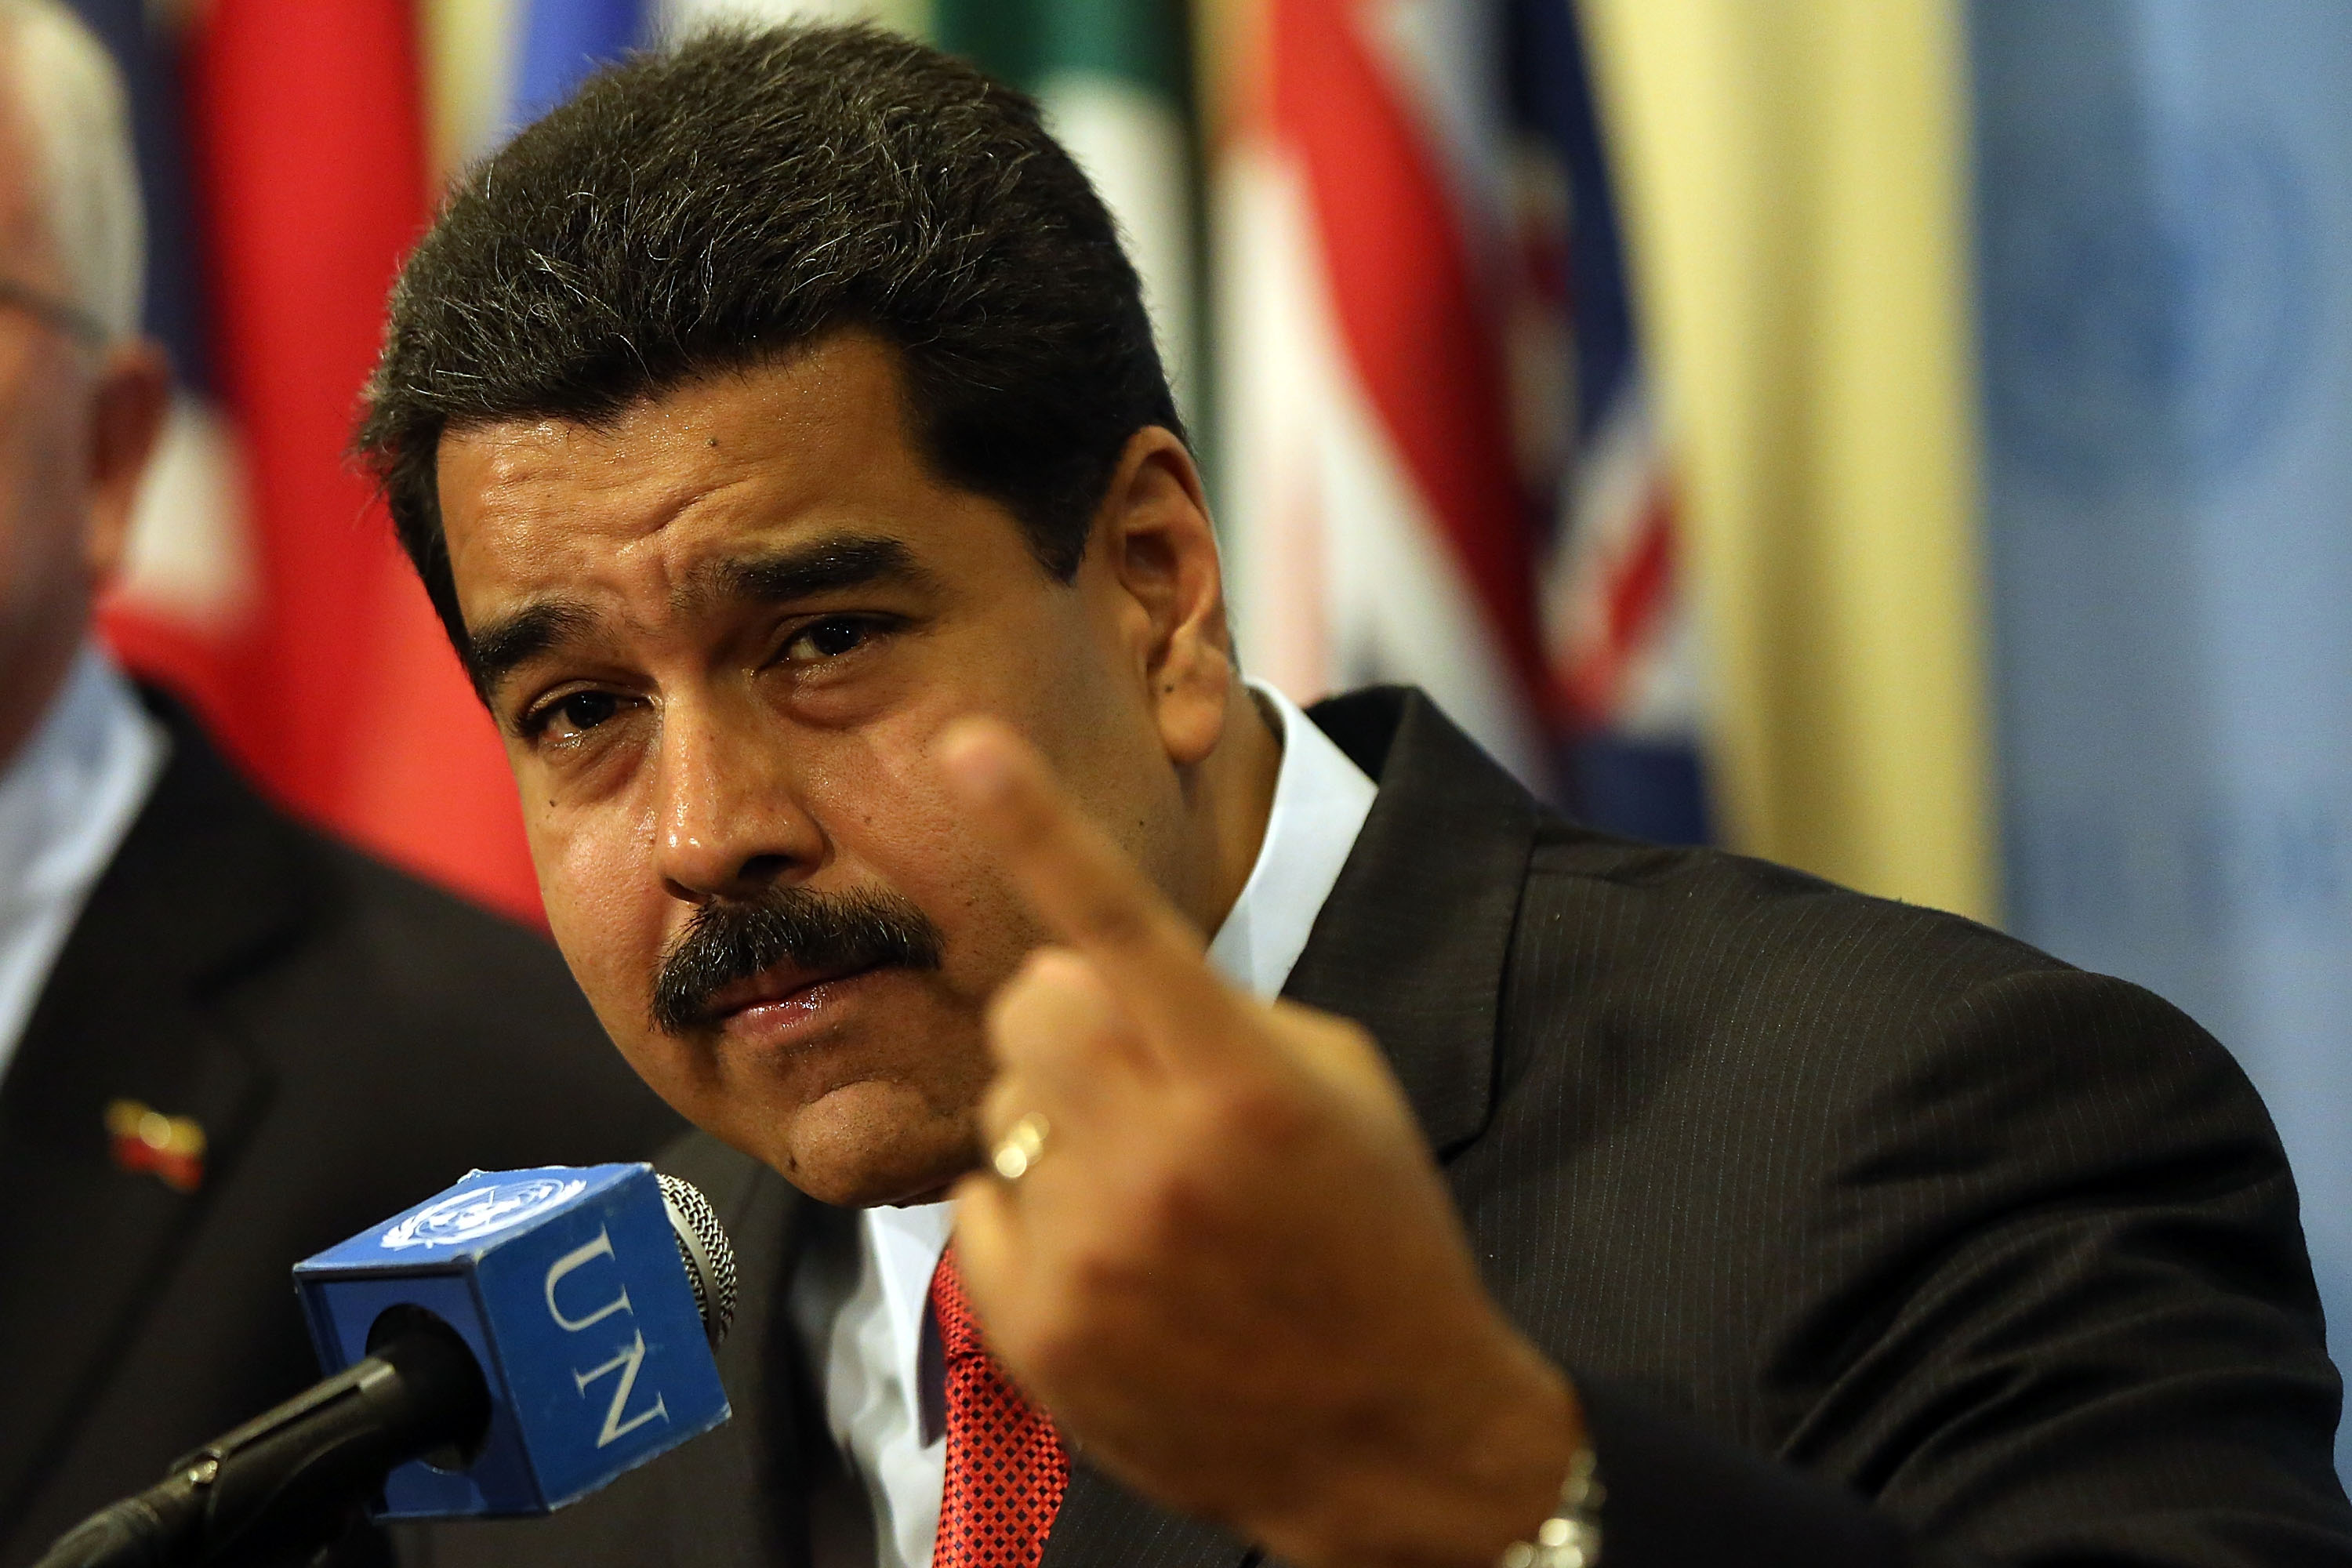 Venezuelan President Nicolas Maduro speaks to the media following a meeting with U.N. chief Ban Ki-moon at the United Nations (UN) headquarters in New York on July 28, 2015 in New York City. (Spencer Platt—Getty Images)